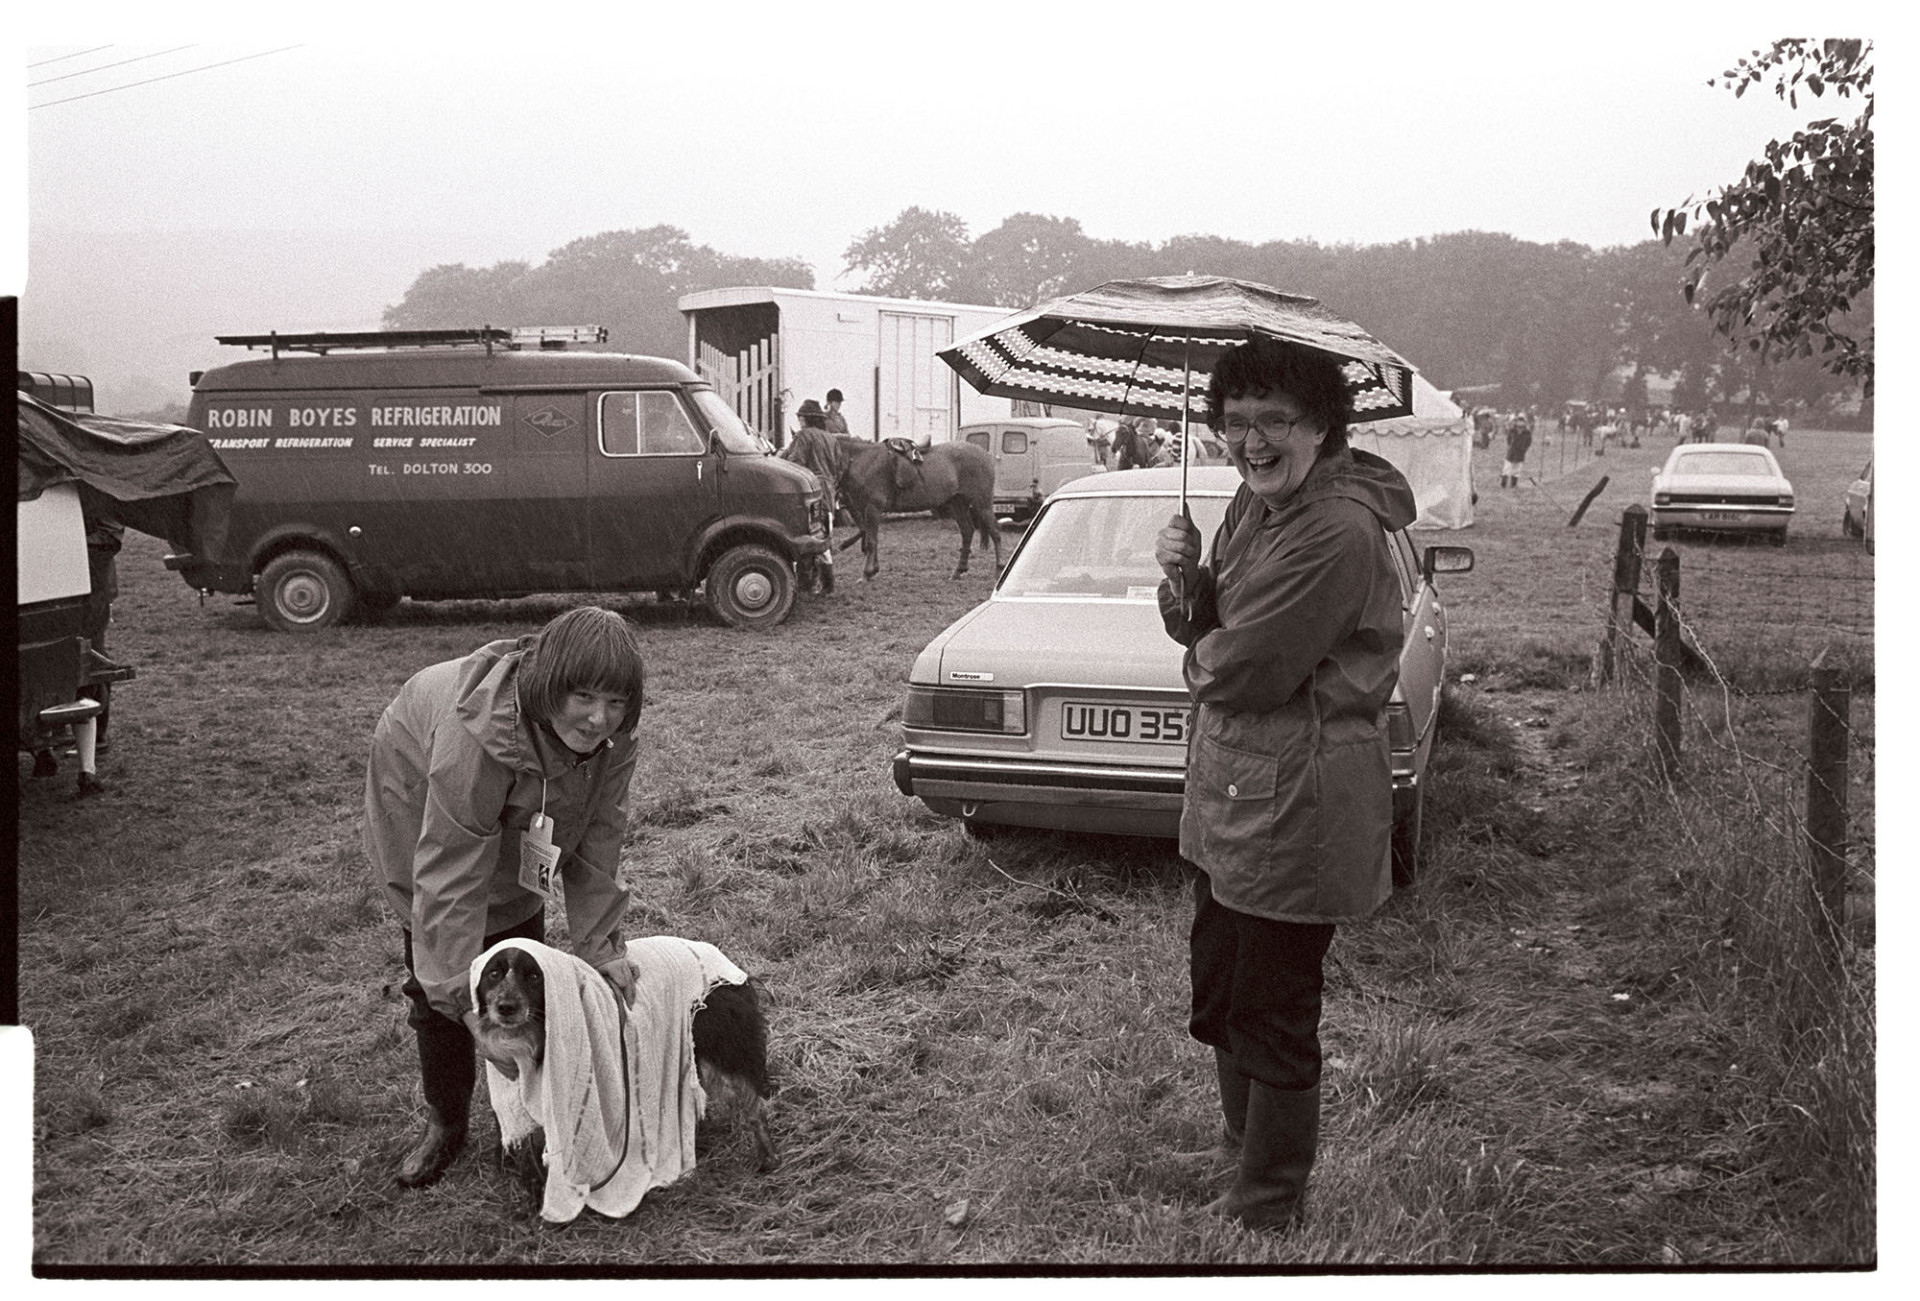 Gymkhana, dog show, trying to dry out dog in pouring rain! Humorous. 
[Two women at Beaford Gymkhana. One woman is drying off a dog with a towel and the other is standing watching under an umbrella. In the background parked cars, horse boxes, horses and riders can be seen.]